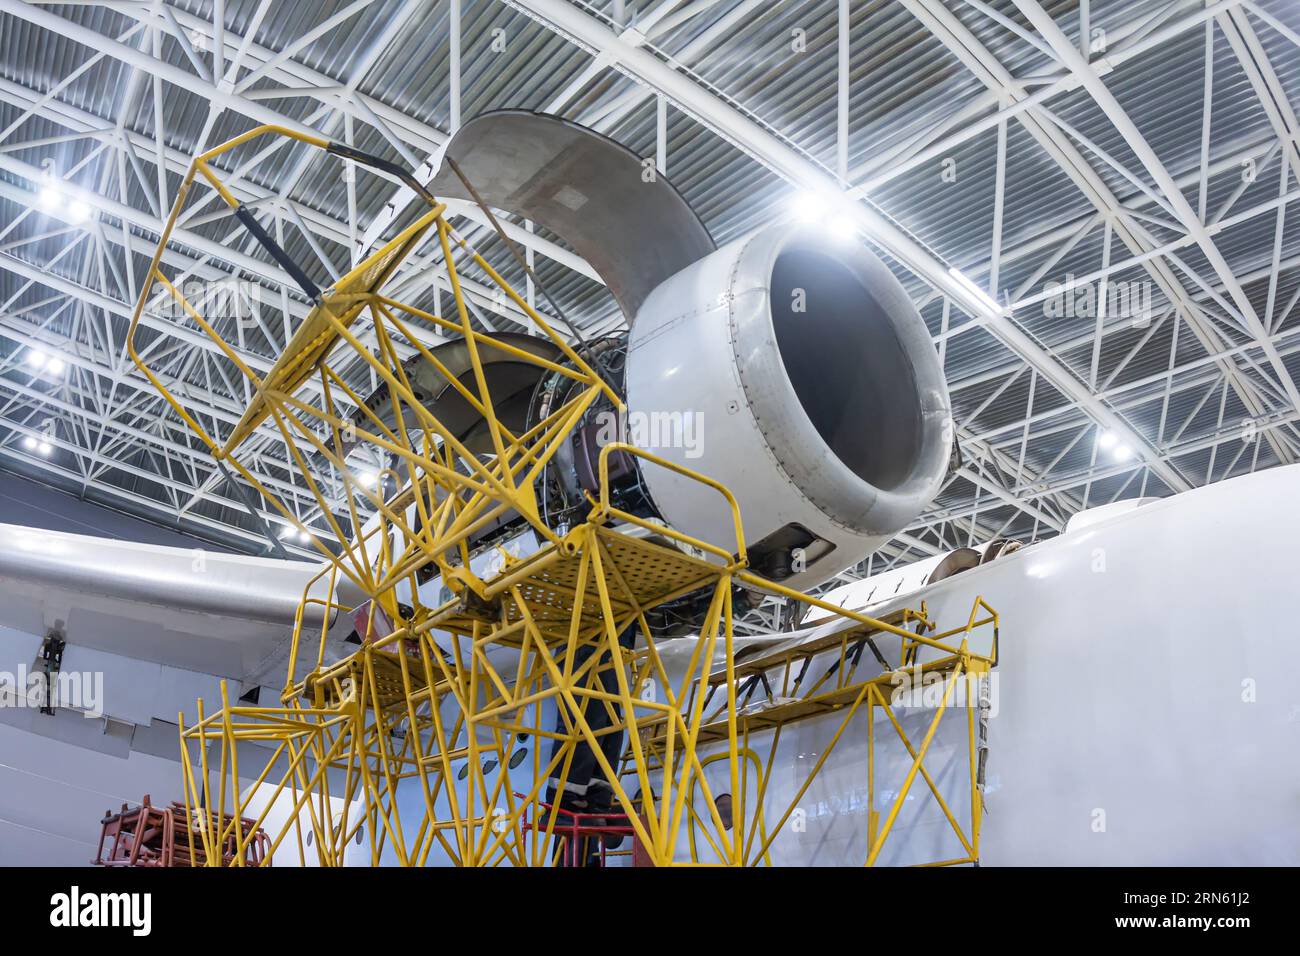 Open high-bypass turbofan aircraft engine of a transport airplane in a hangar Stock Photo